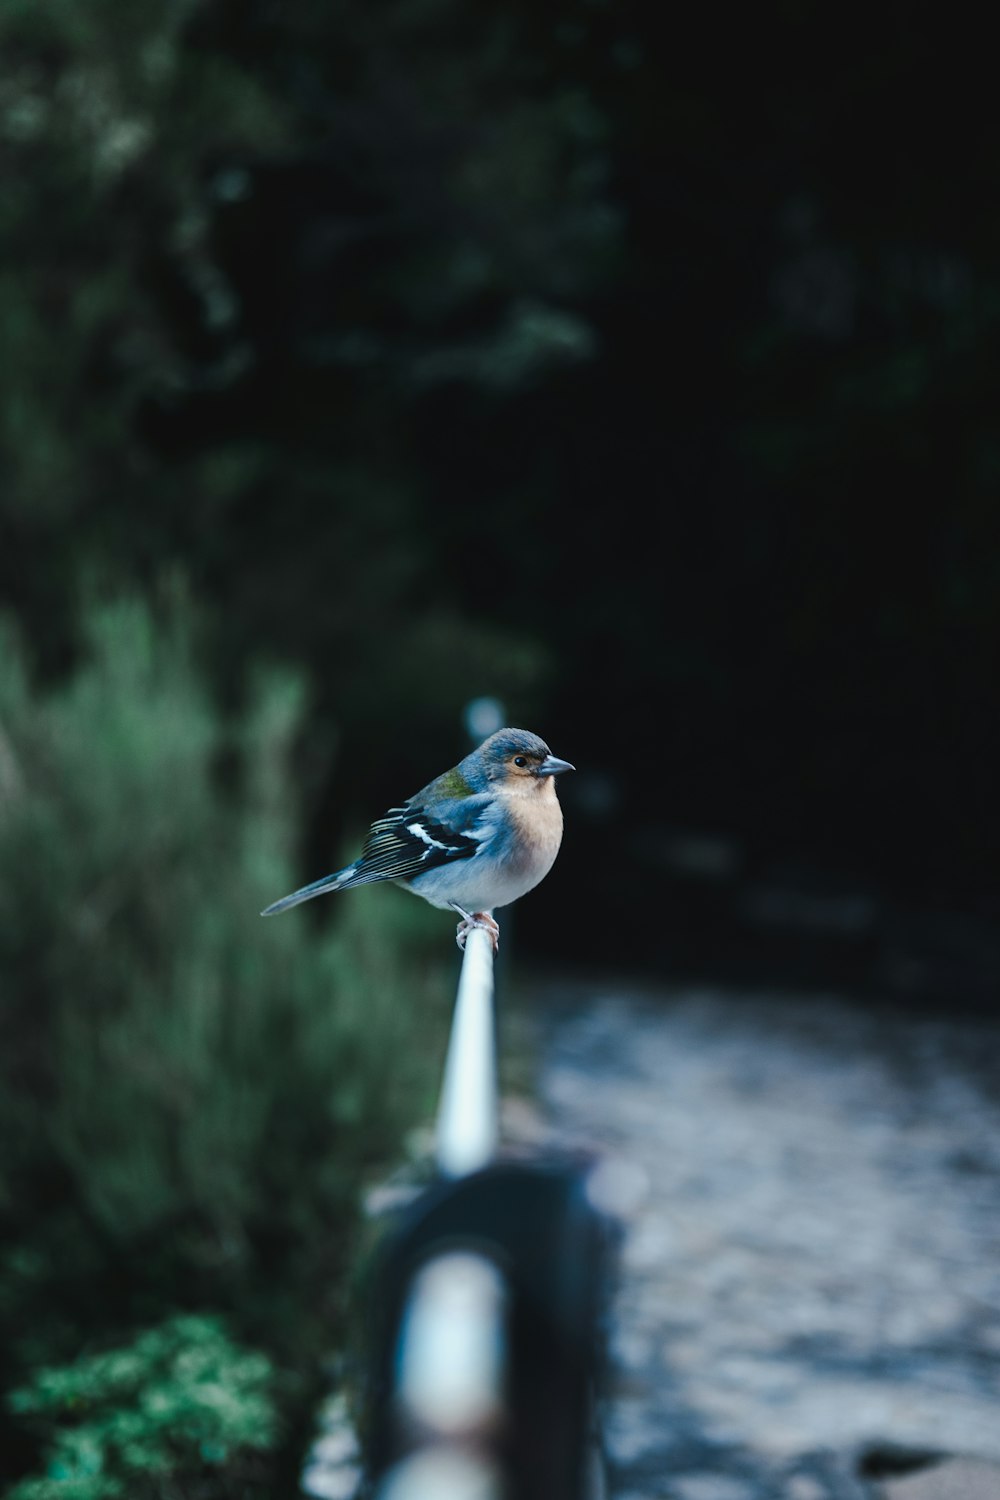 blue and white bird on gray metal bar